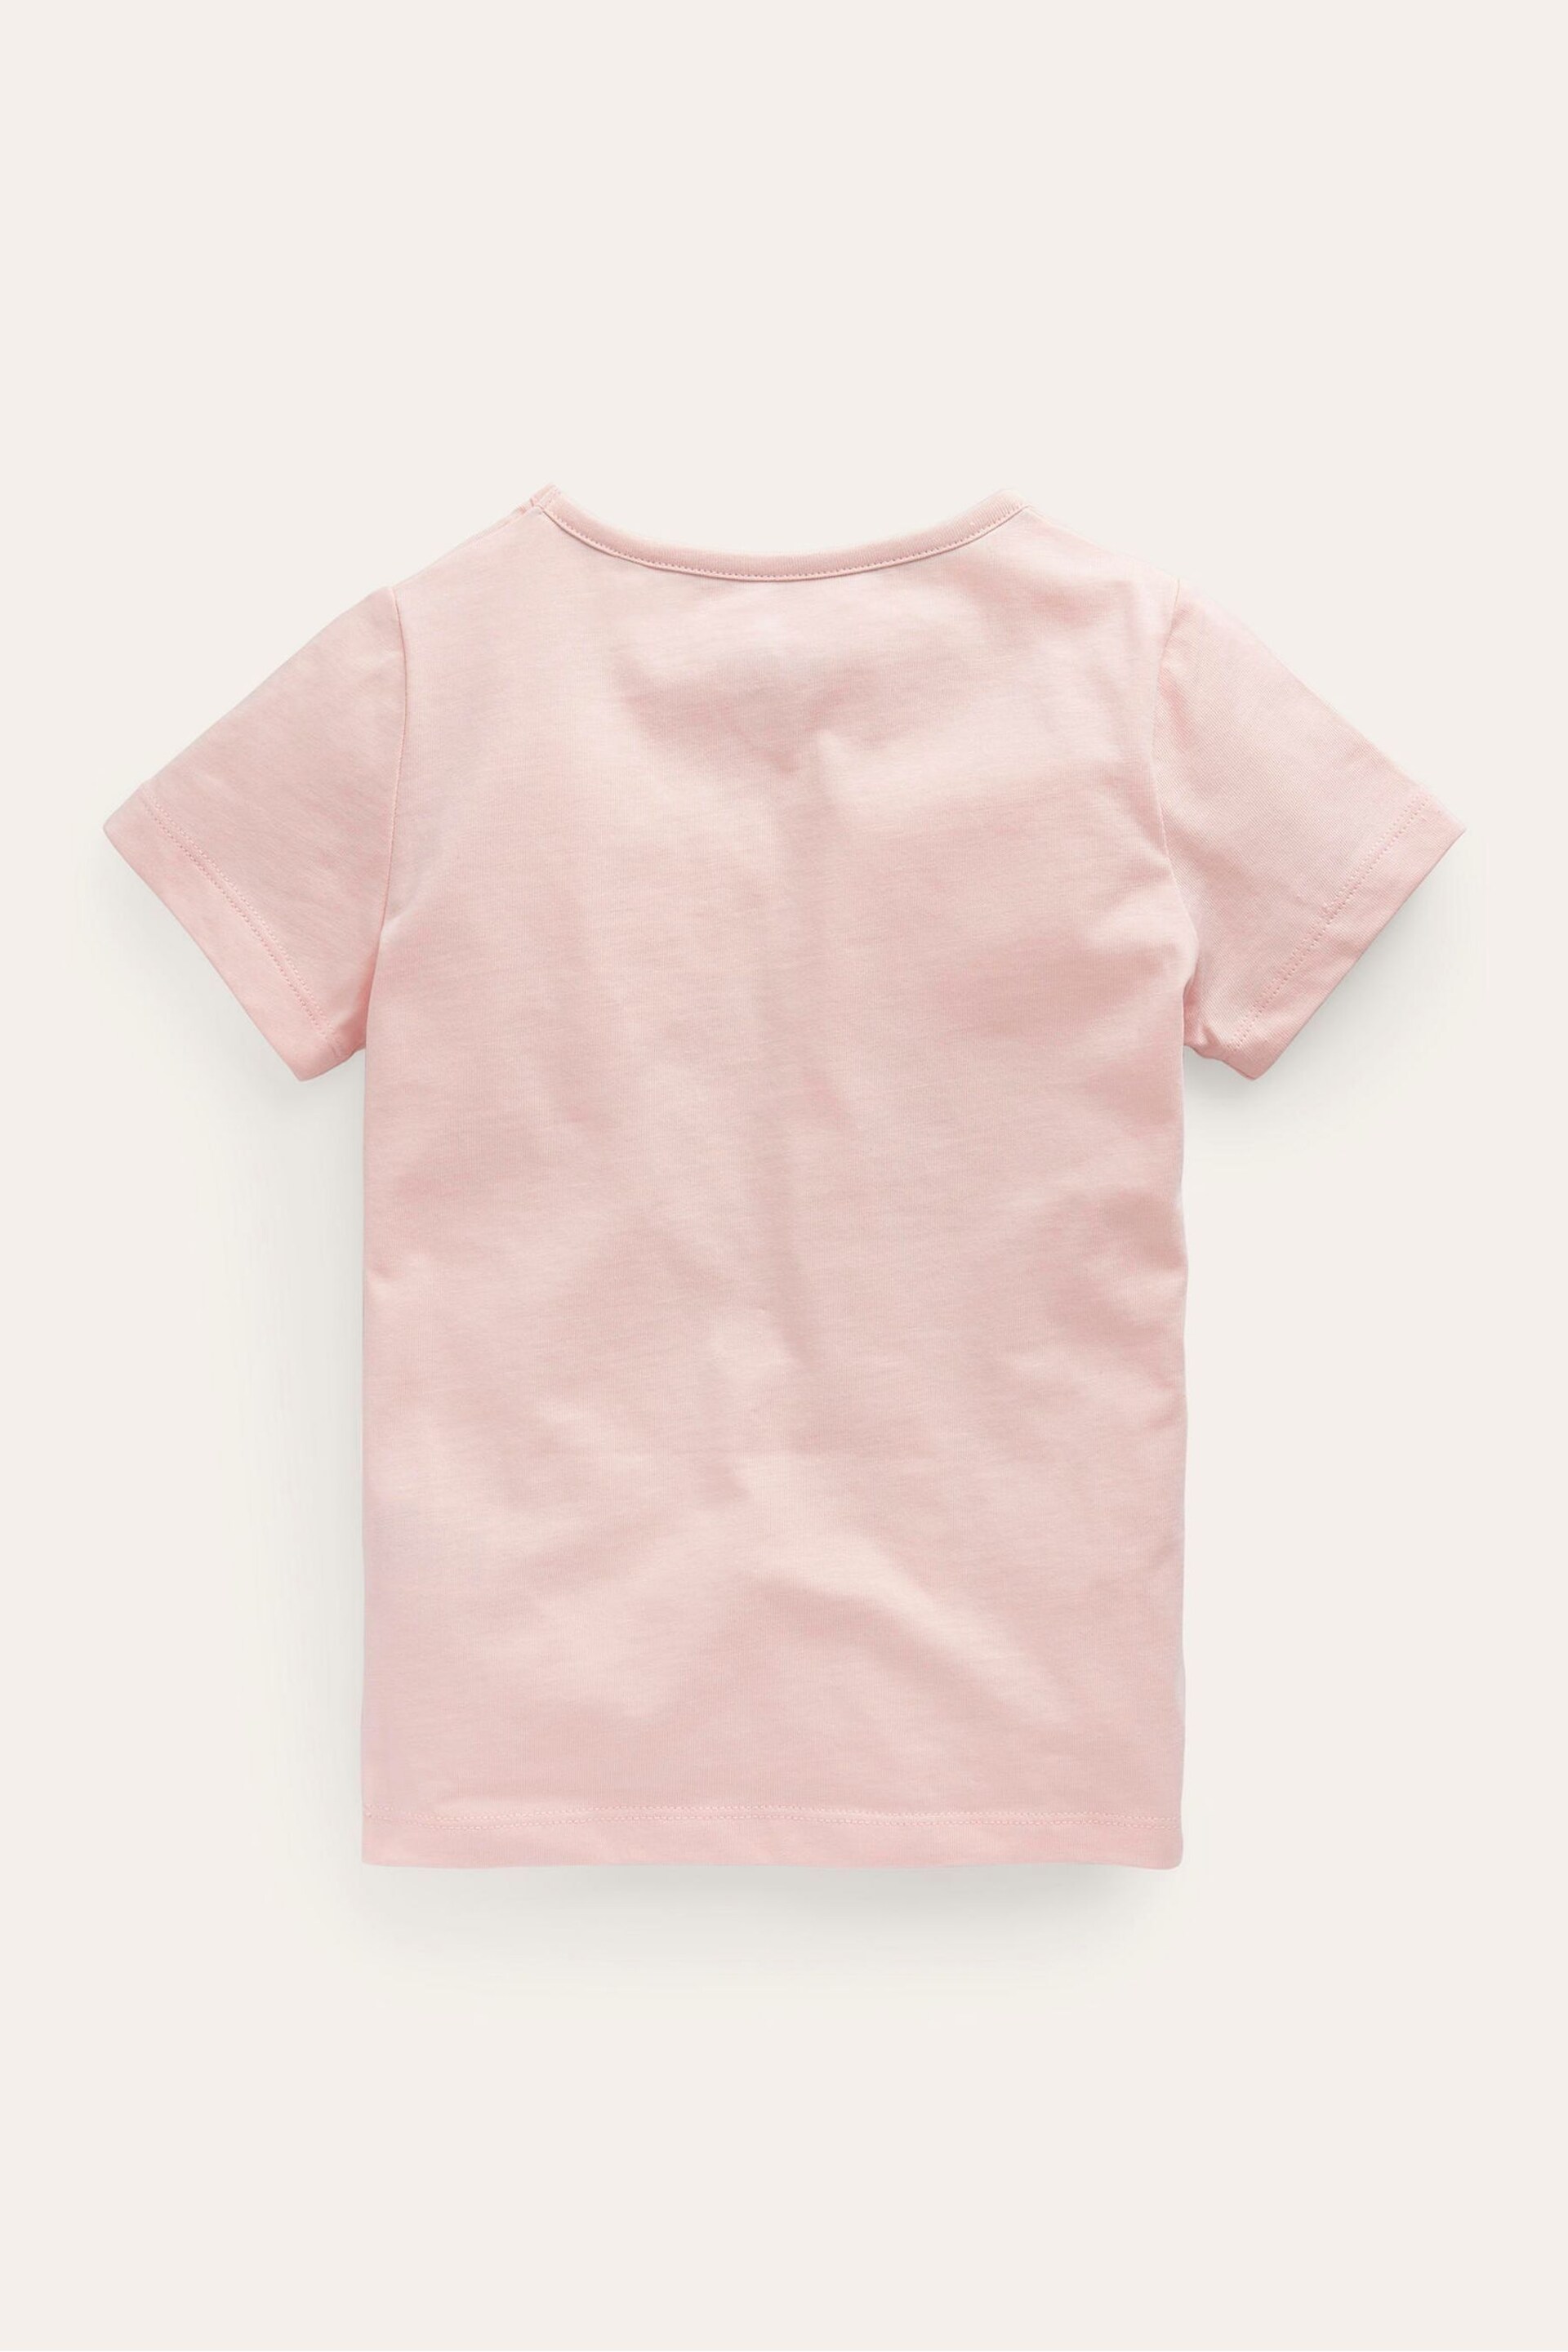 Boden Pink Printed Graphic T-Shirt - Image 2 of 3